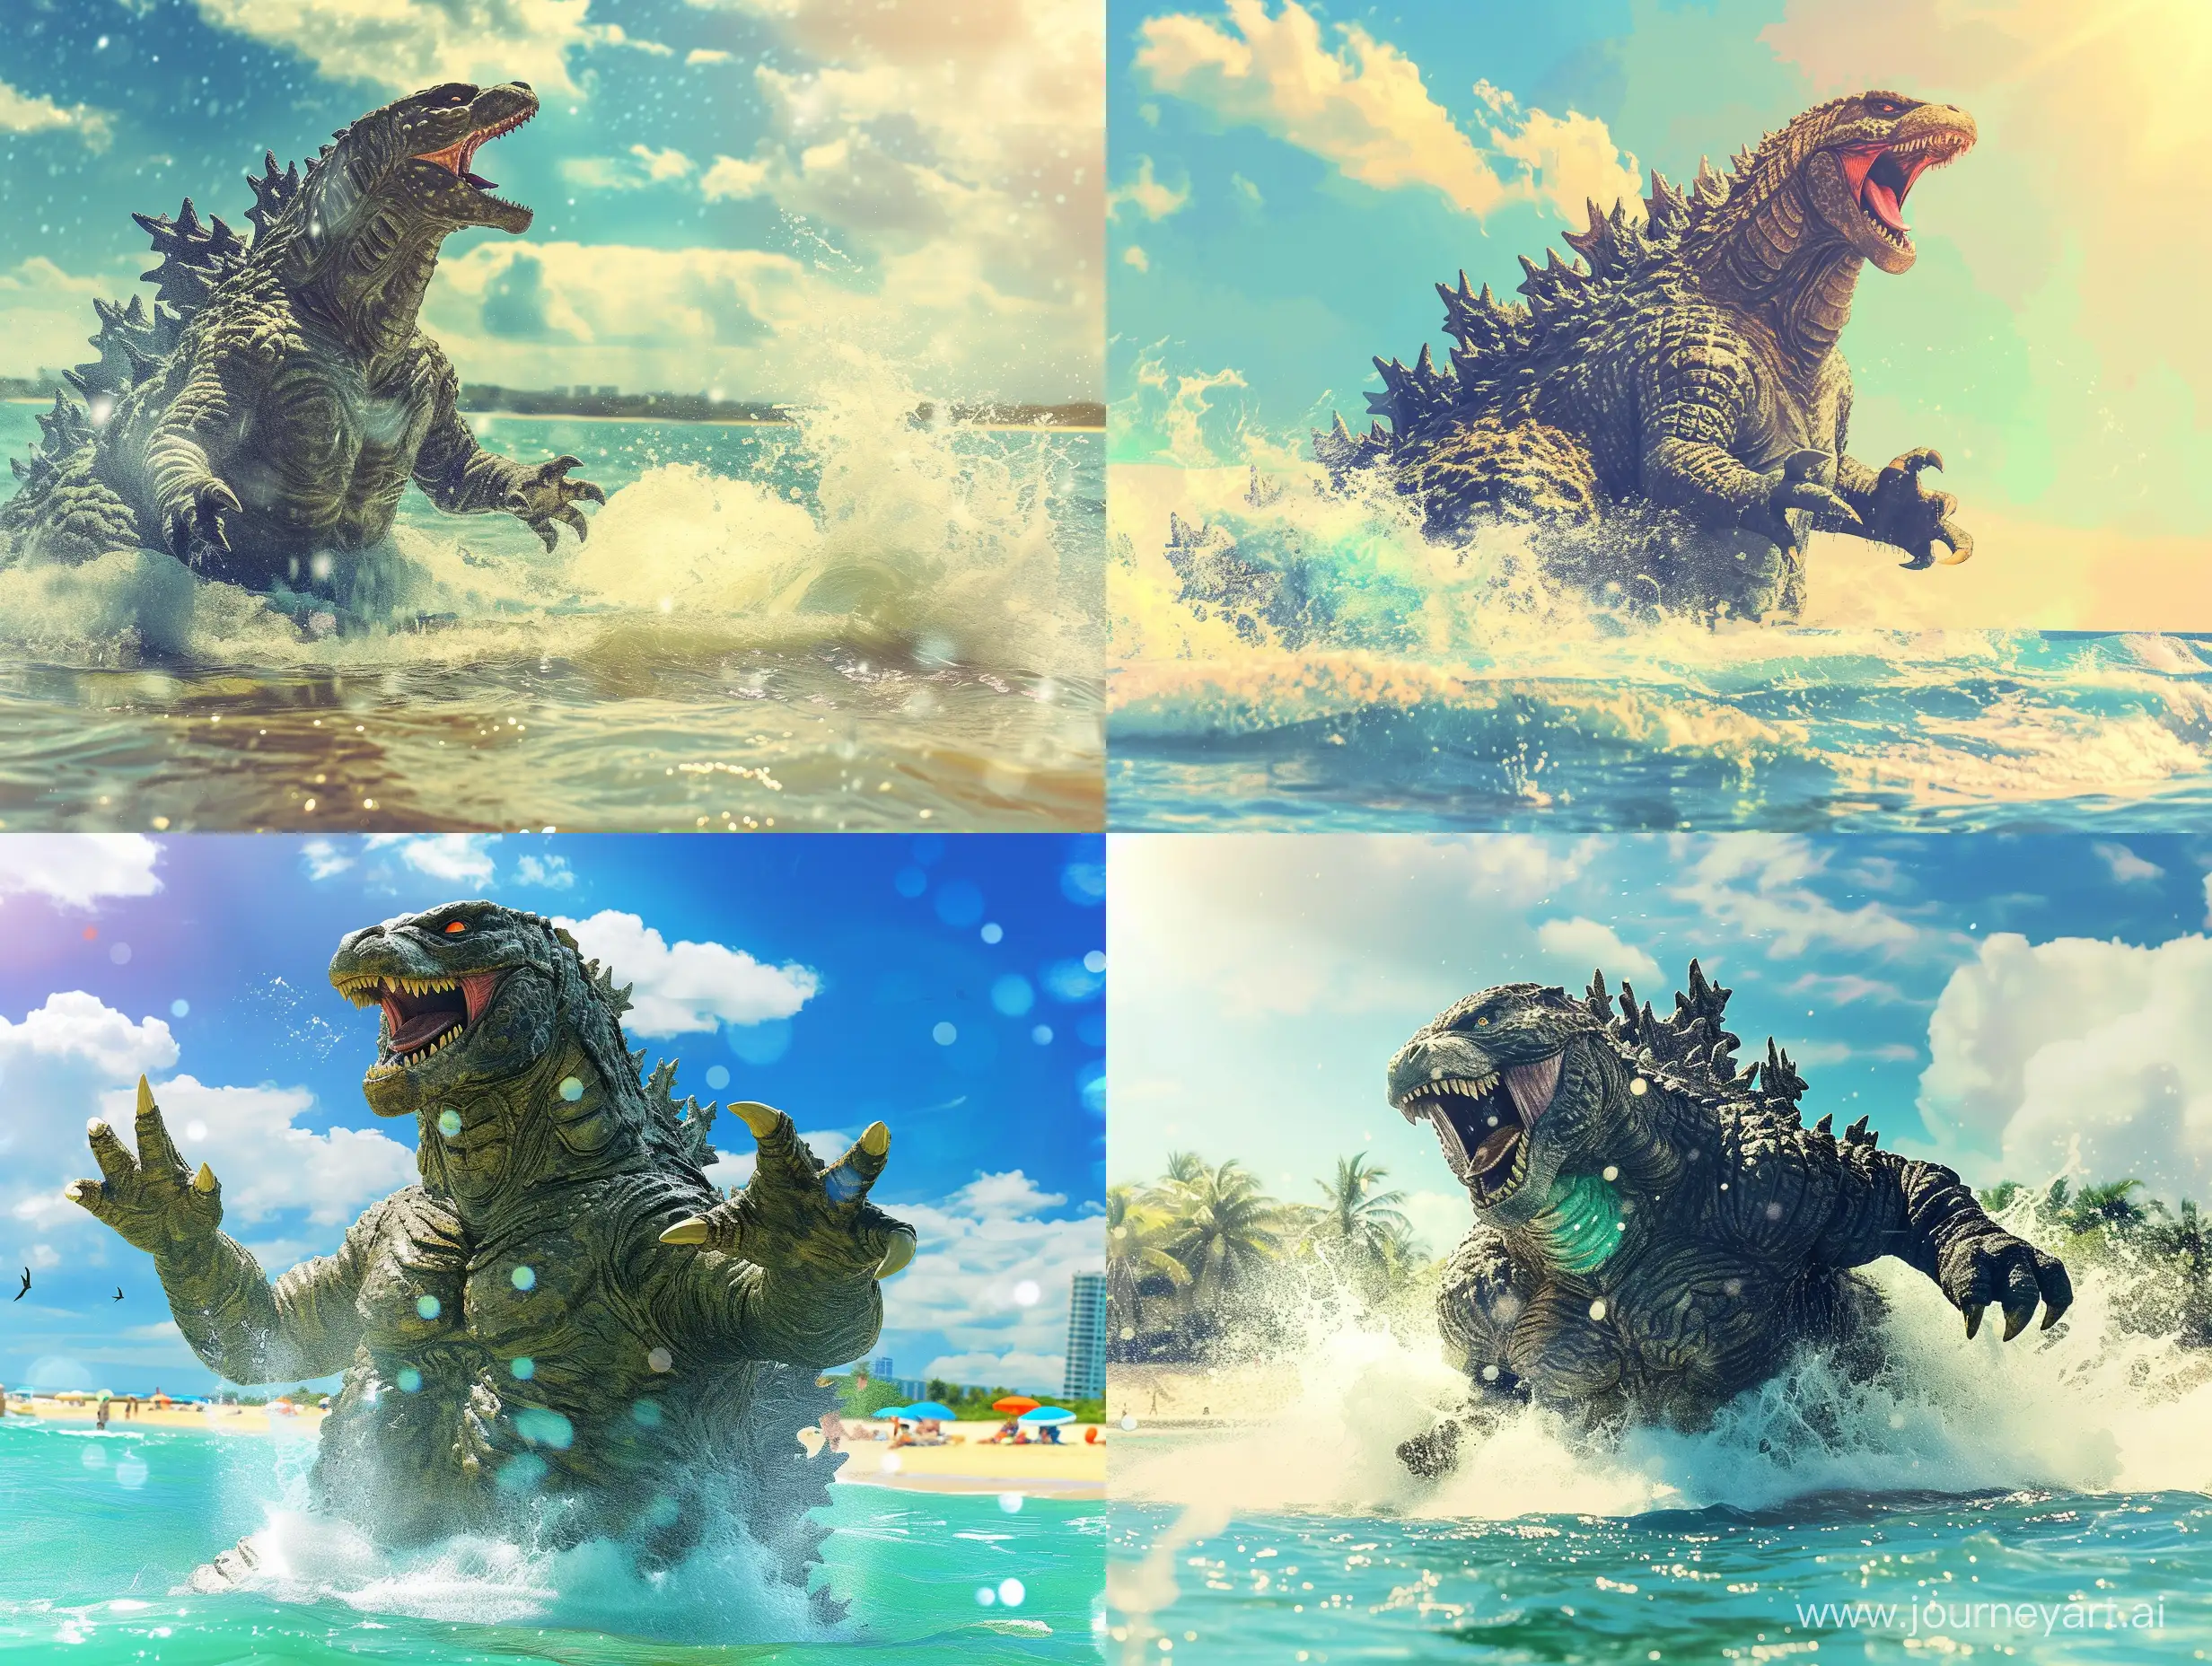 Godzilla rising up out of the ocean, Sunny day at the beach, vivid colors, high detail,